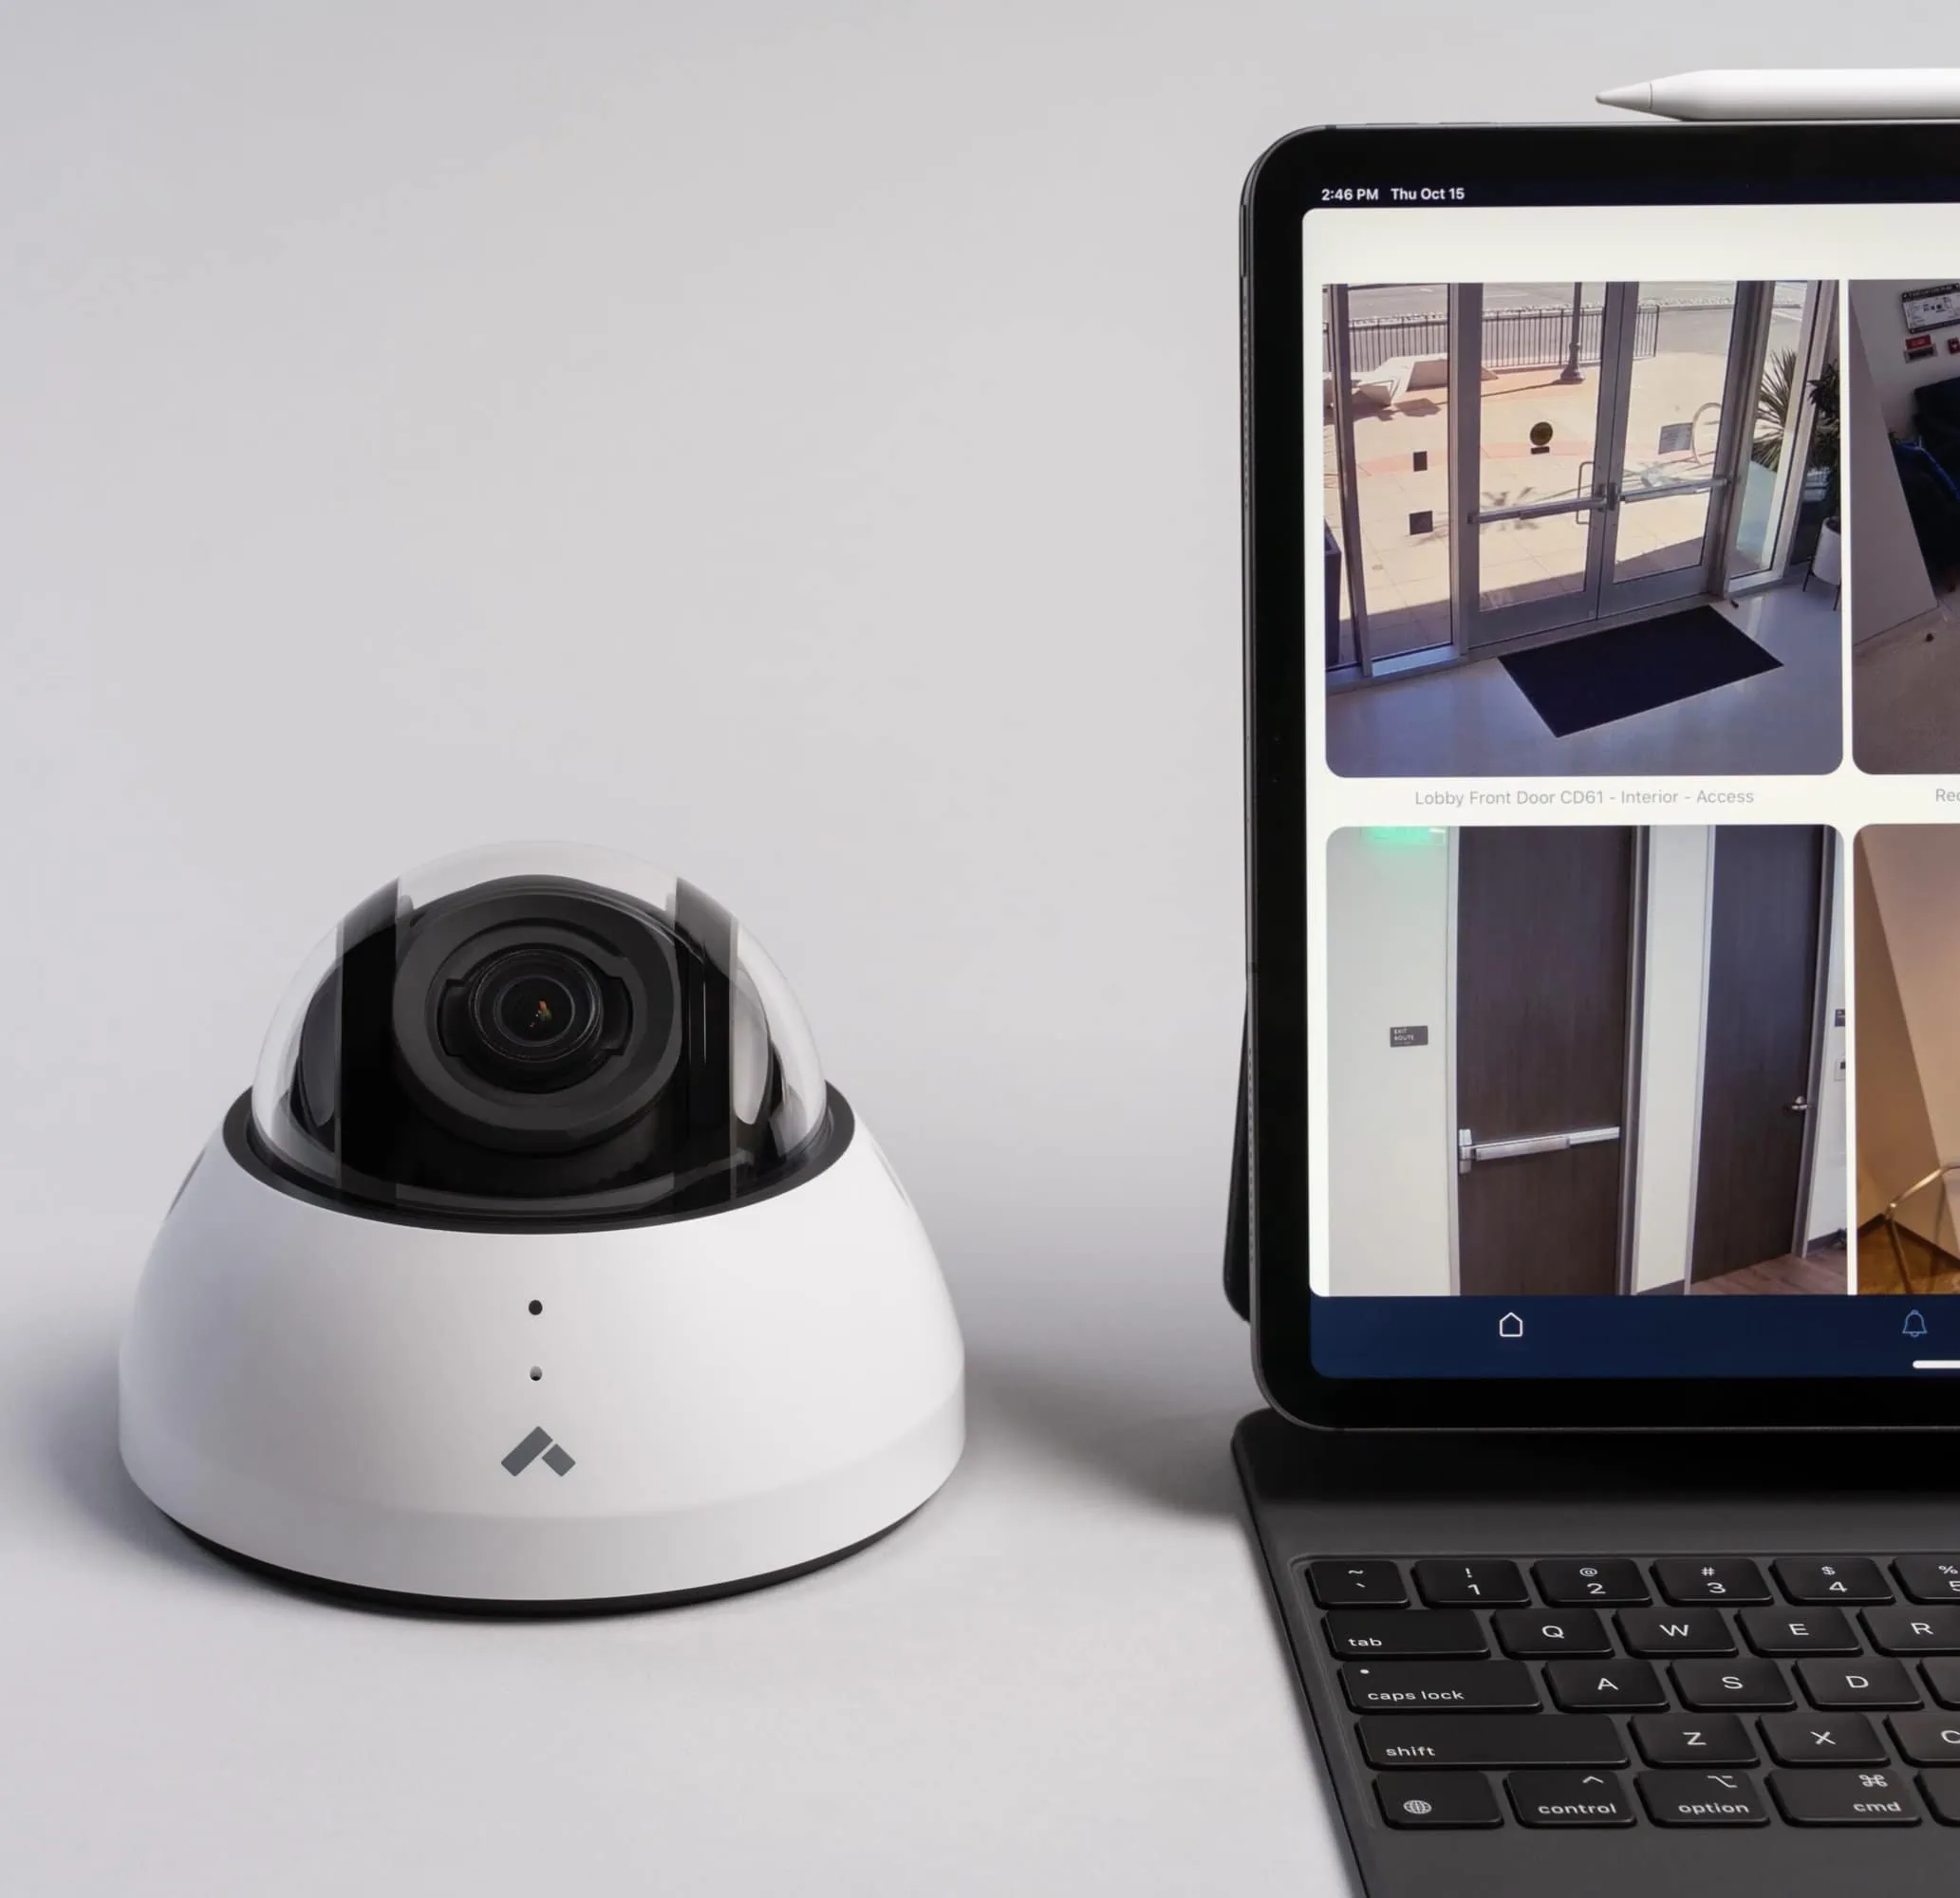 Dome camera next to laptop displaying footage from the security systems of a Los Ángeles business